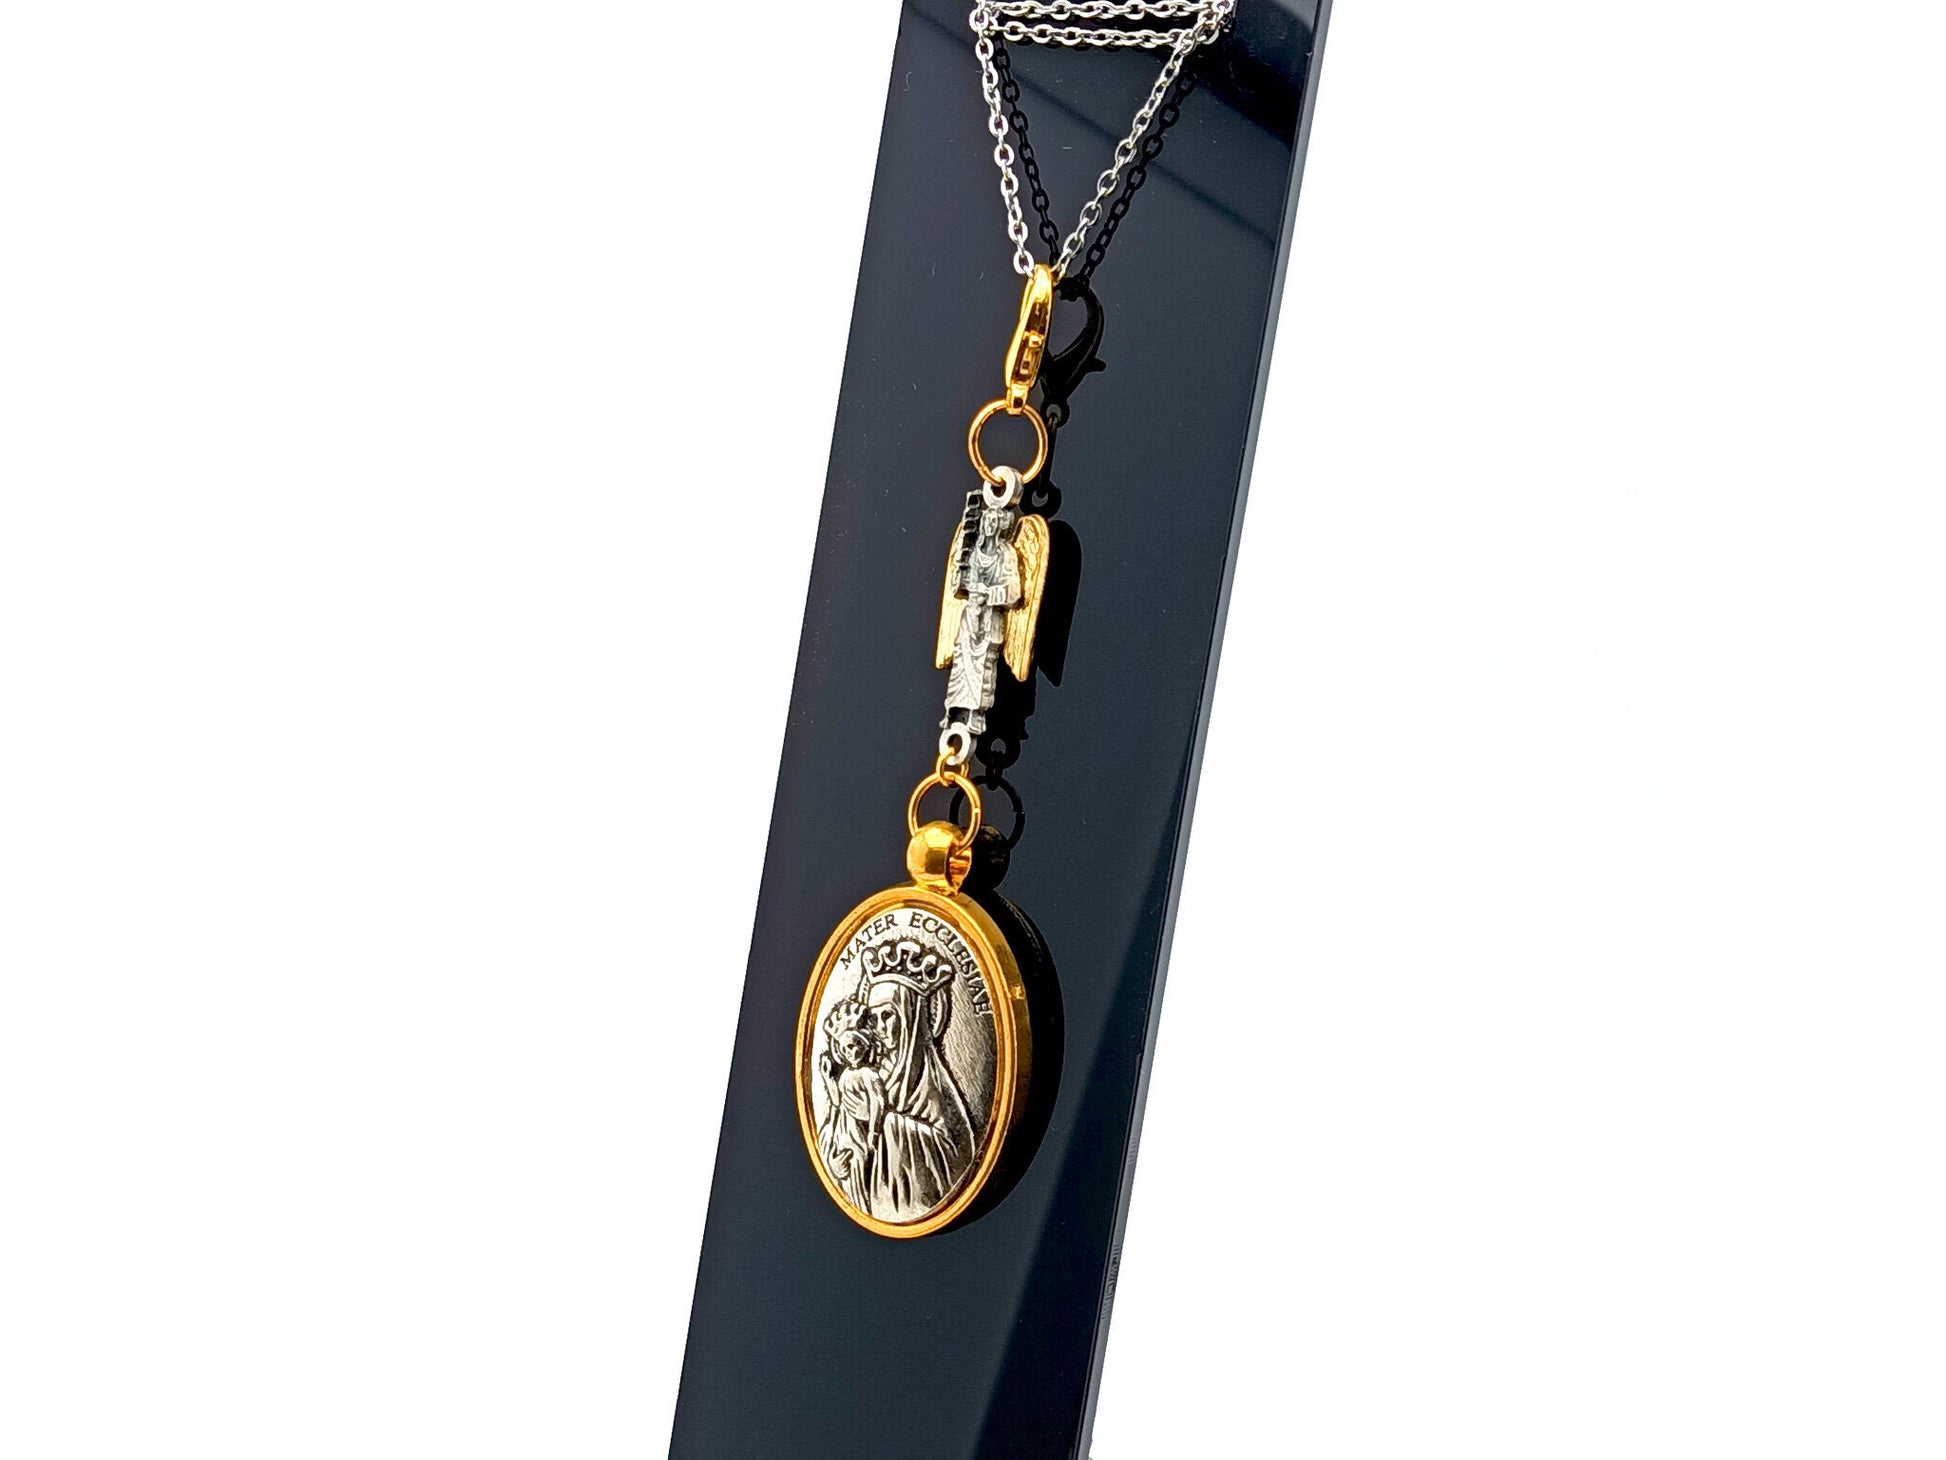 Mater Ecclesiae Mother of the Church unique rosary beads key fob with gold and silver linking Saint Michael medal and clasp.